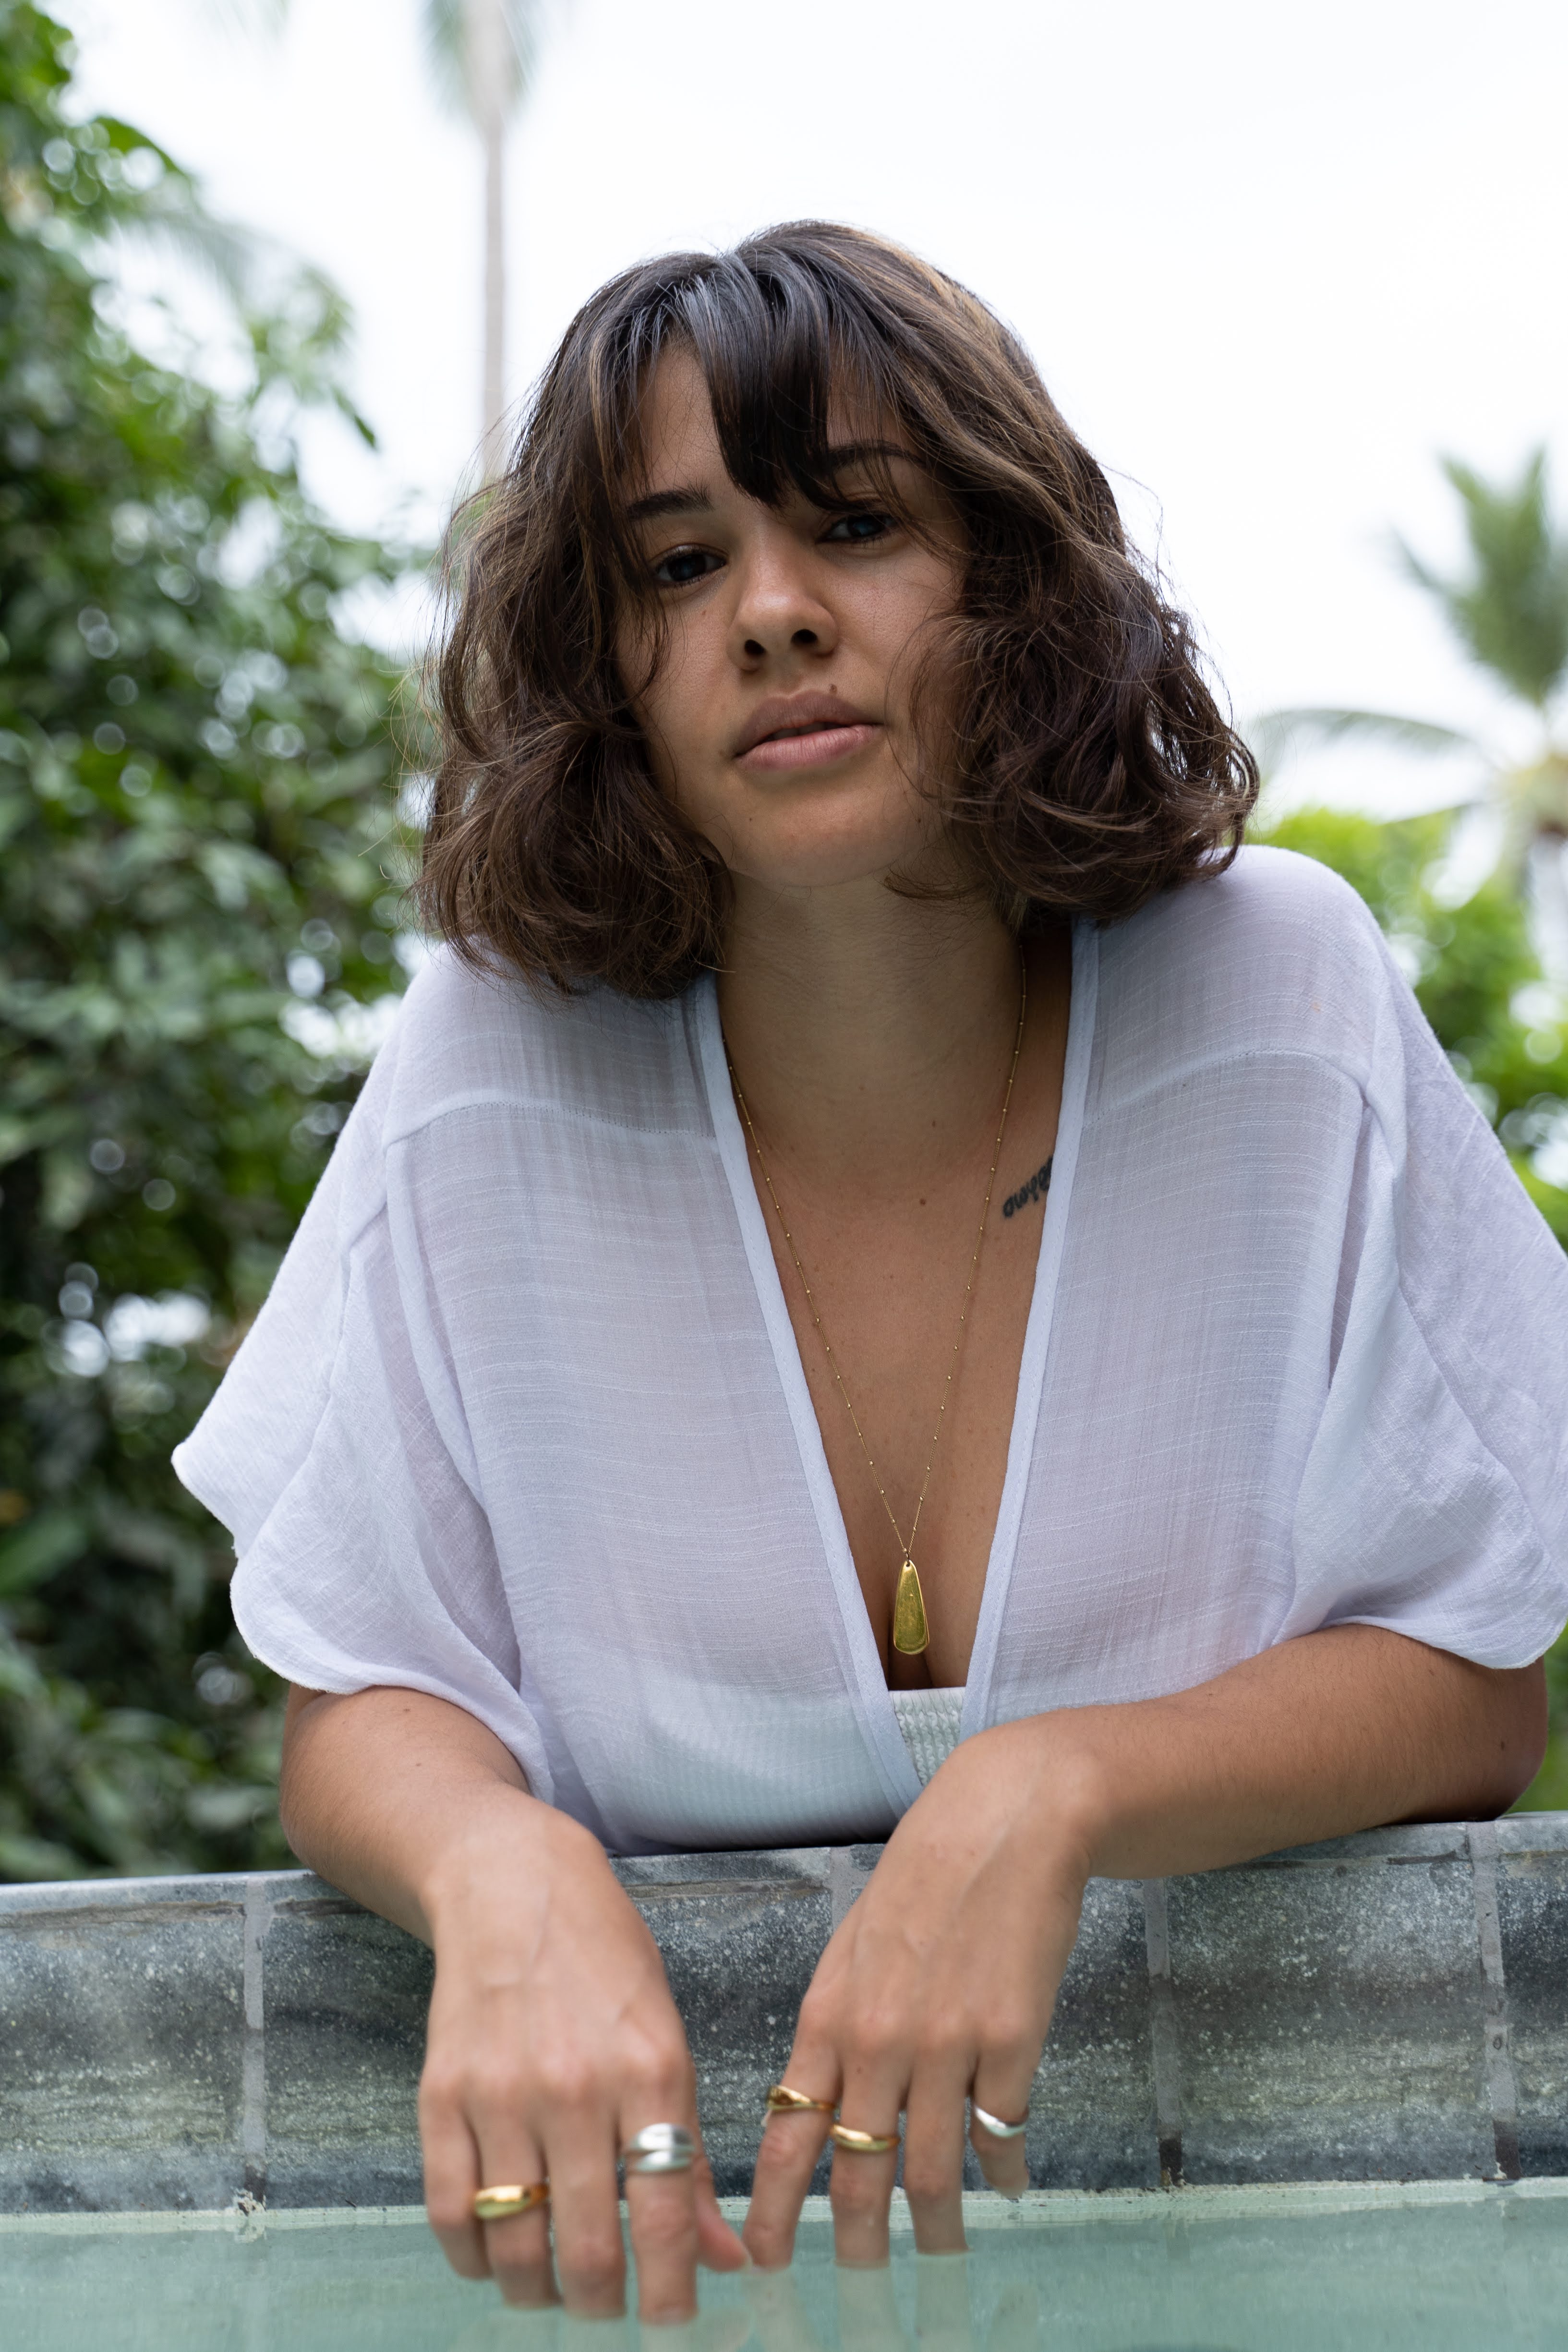 Wearing the Valerie Necklace by Megan Collins Jewellery is an invitation to embrace your own inner ability to grow and change. Let it be a symbol of your willingness to explore new horizons, broaden your perspective, and challenge yourself to become the best version of yourself.